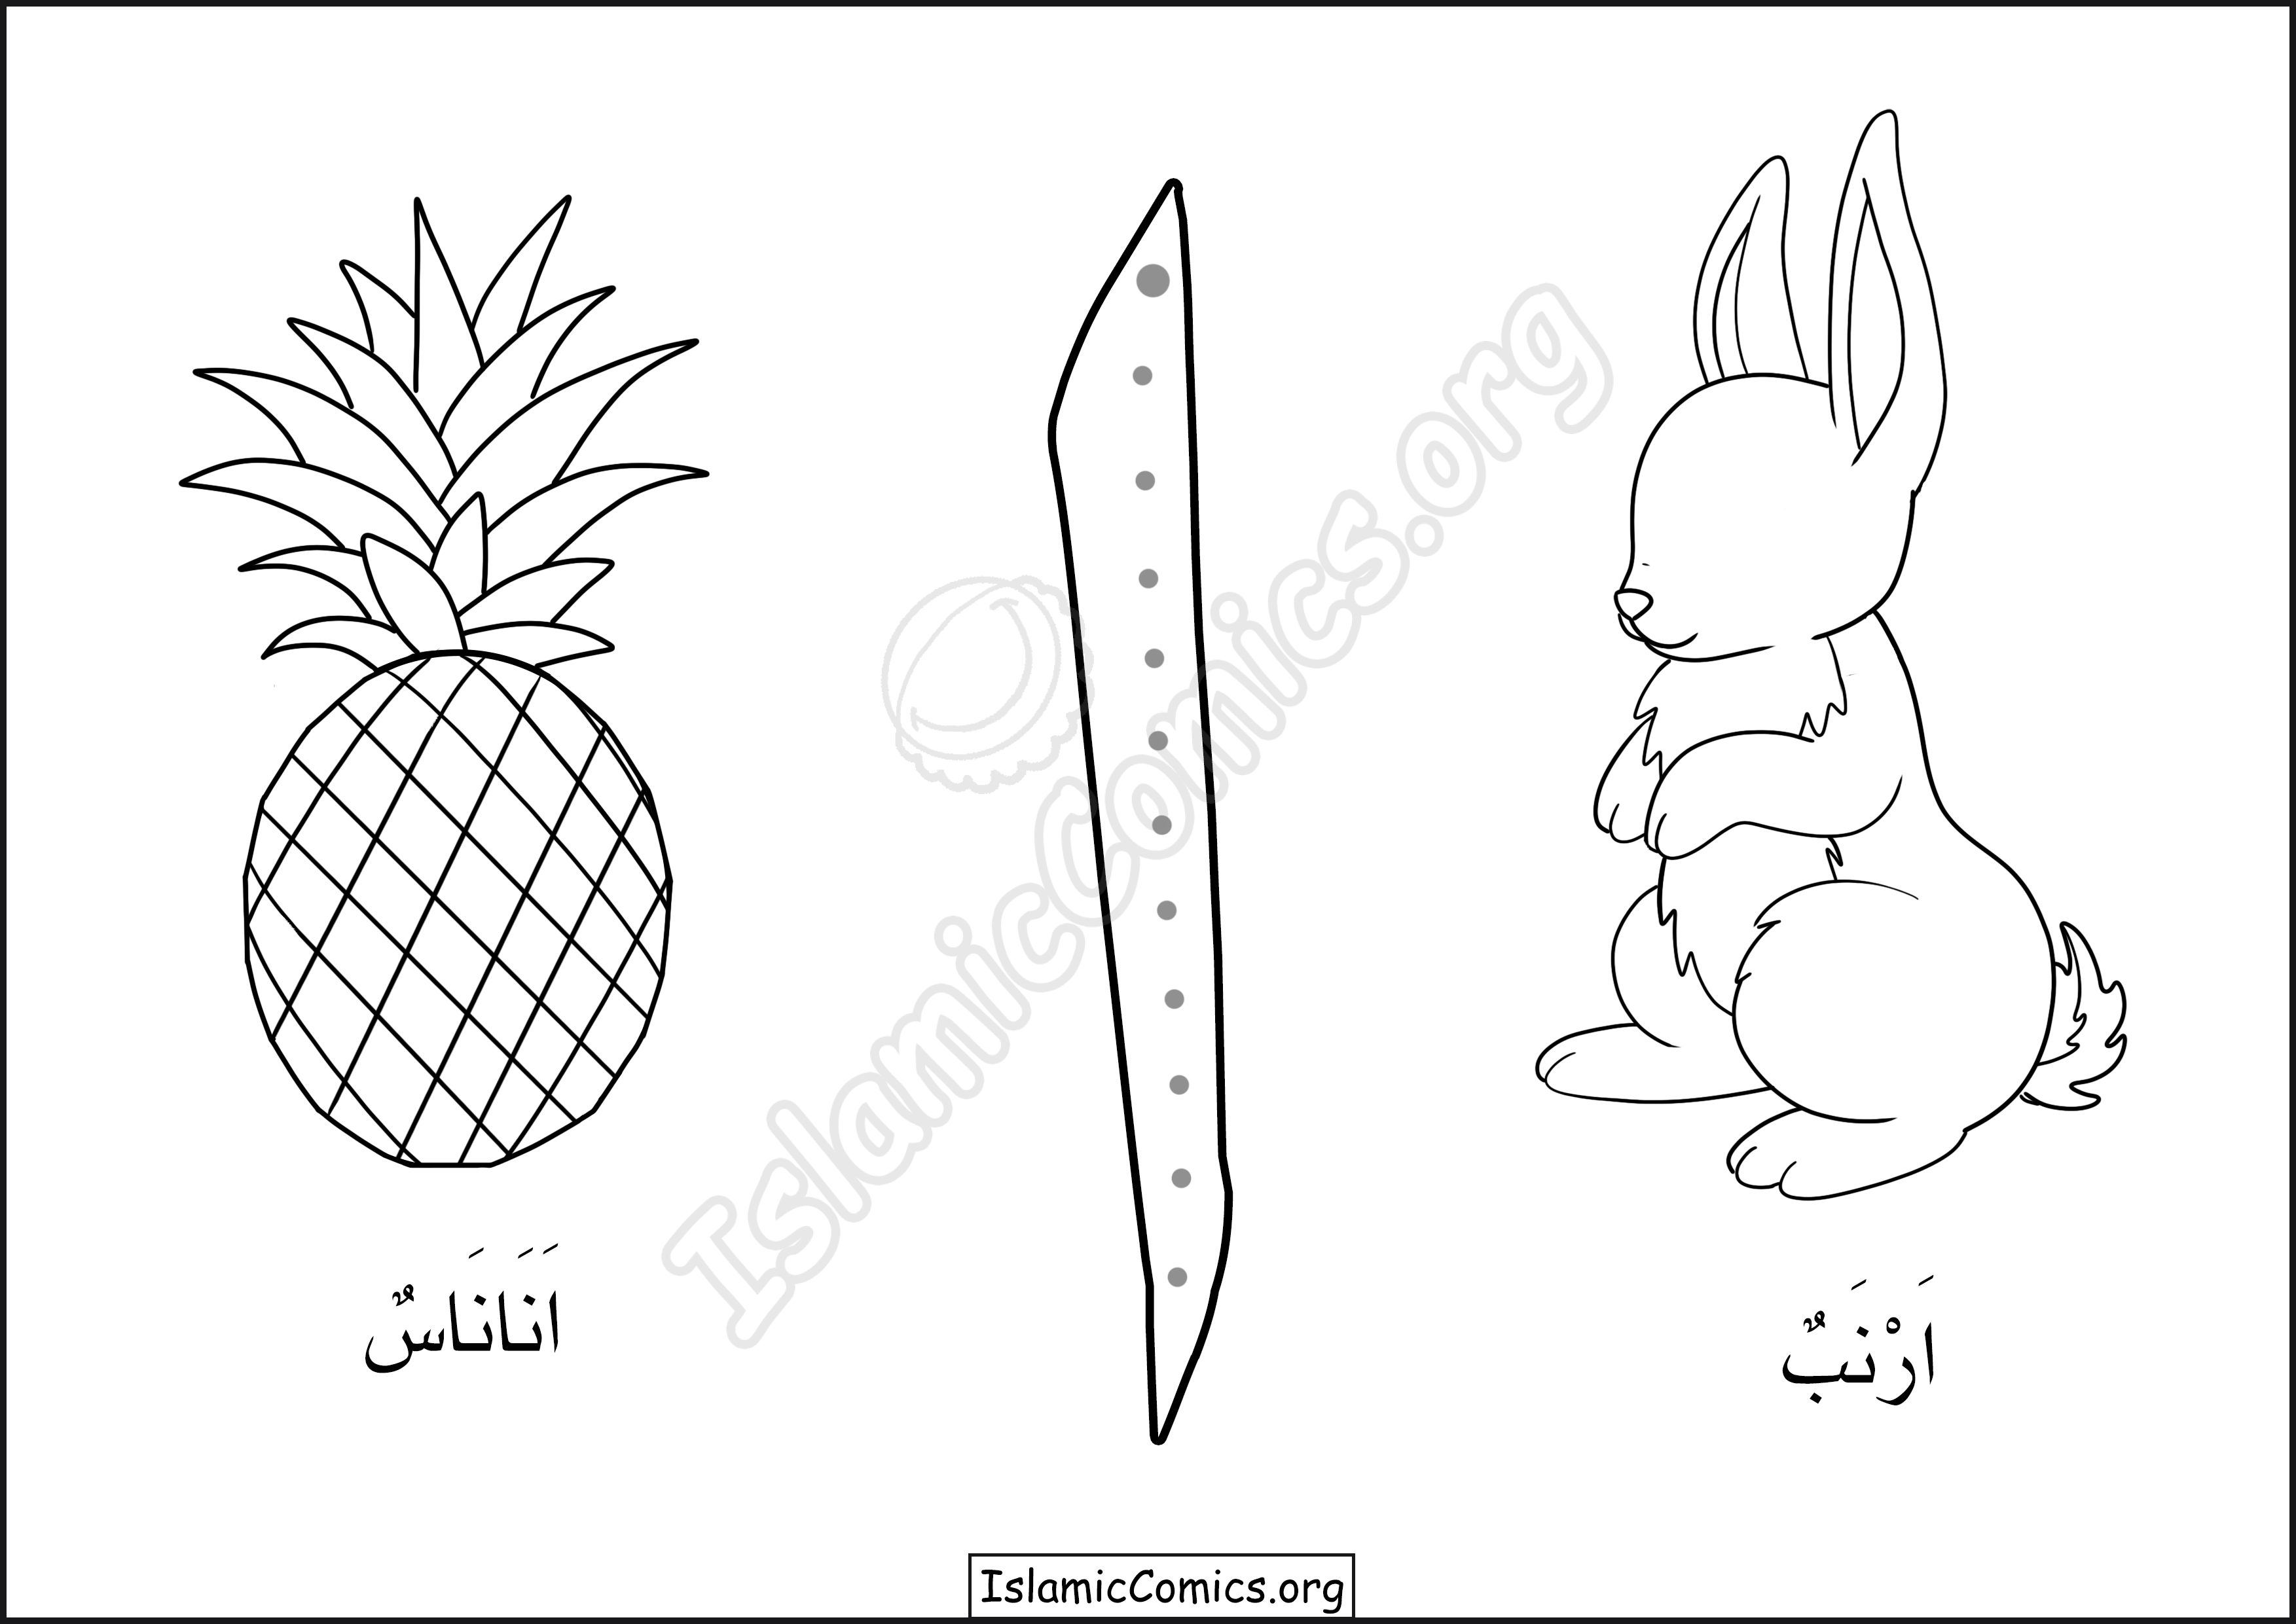 Islamic Coloring Pages & Activity ...islamiccomics.org